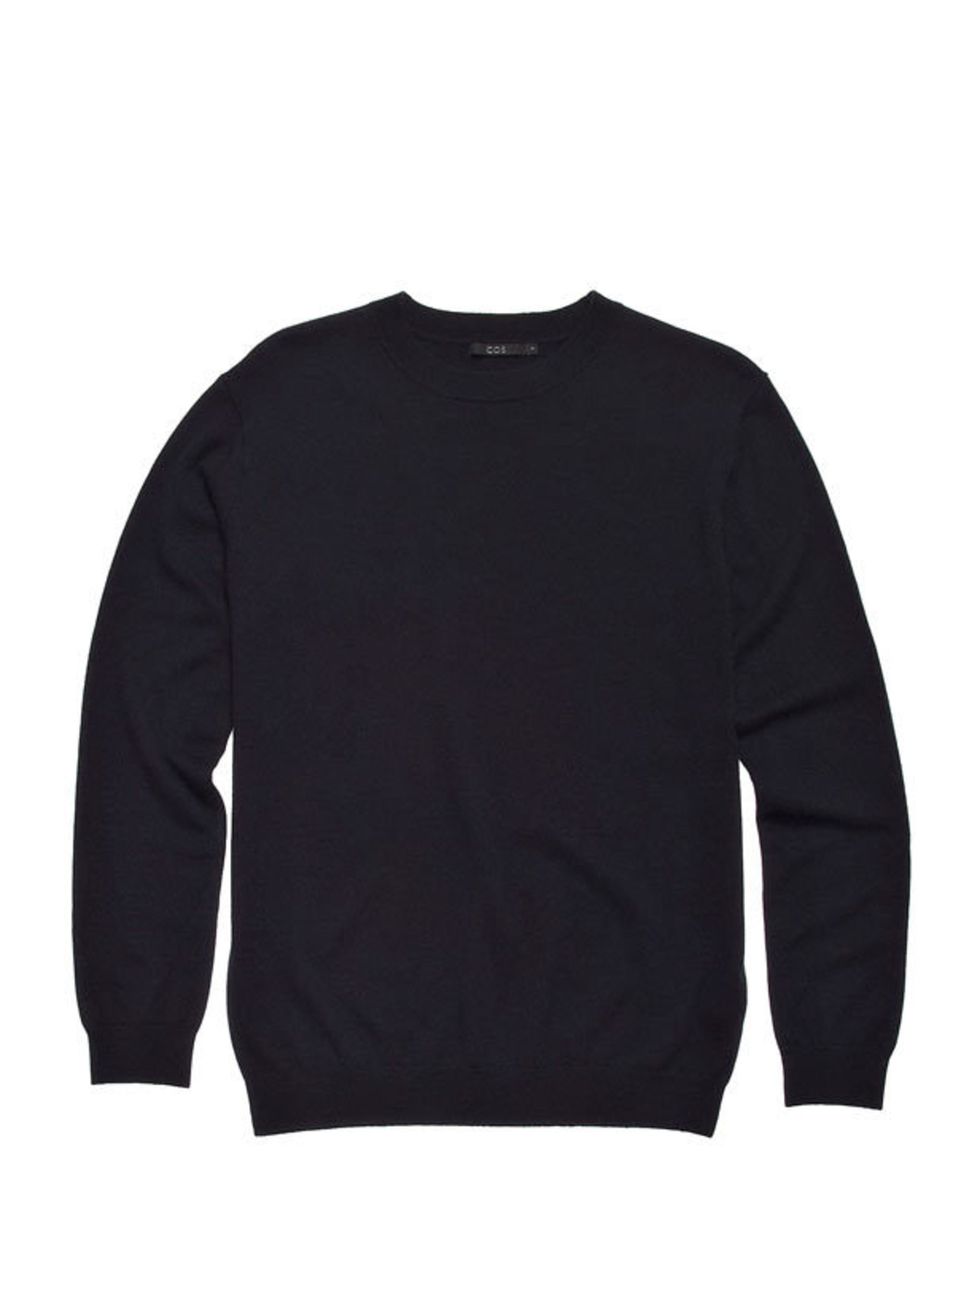 <p>Cos cashmere sweater, £89, for stockists call 0207 478 0400</p>